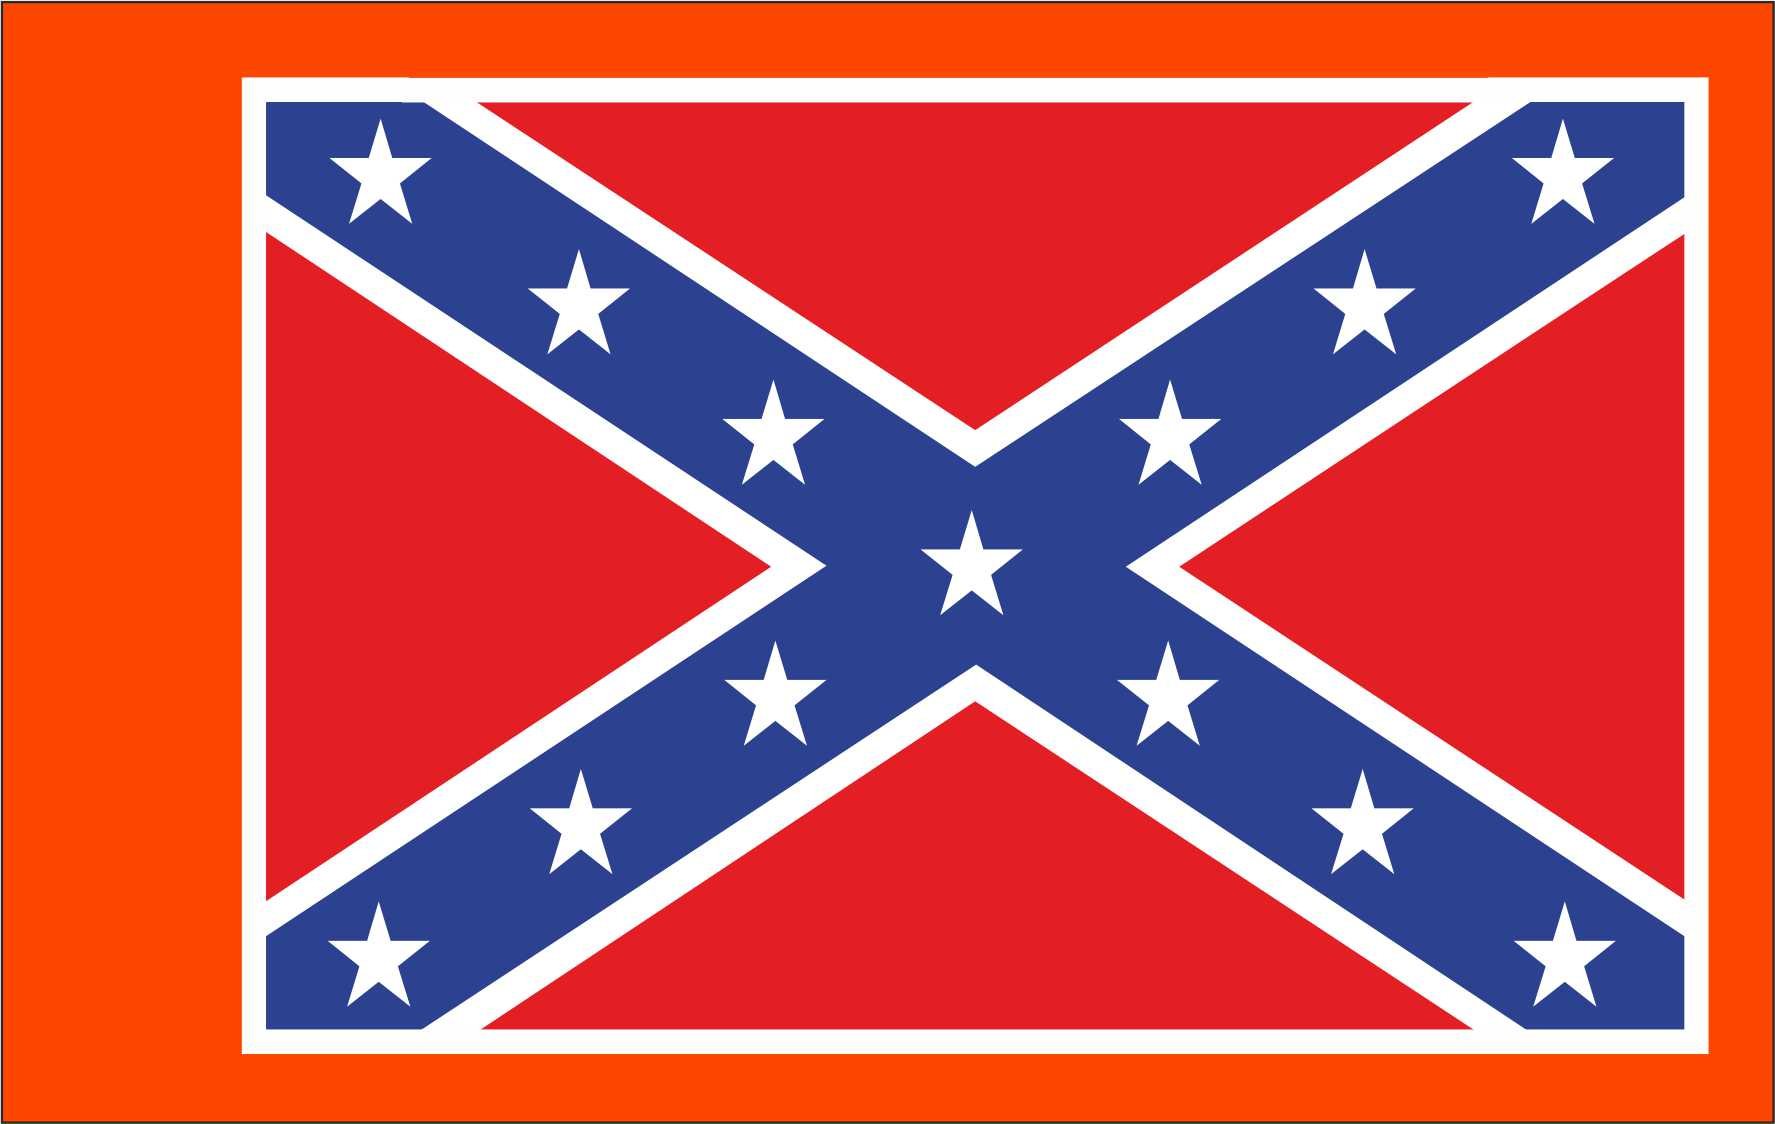 general, Lee, Dukes, Hazzard, Dodge, Charger, Muscle, Hot, Rod, Rods, Television, Series, Confederate, Flag Wallpaper